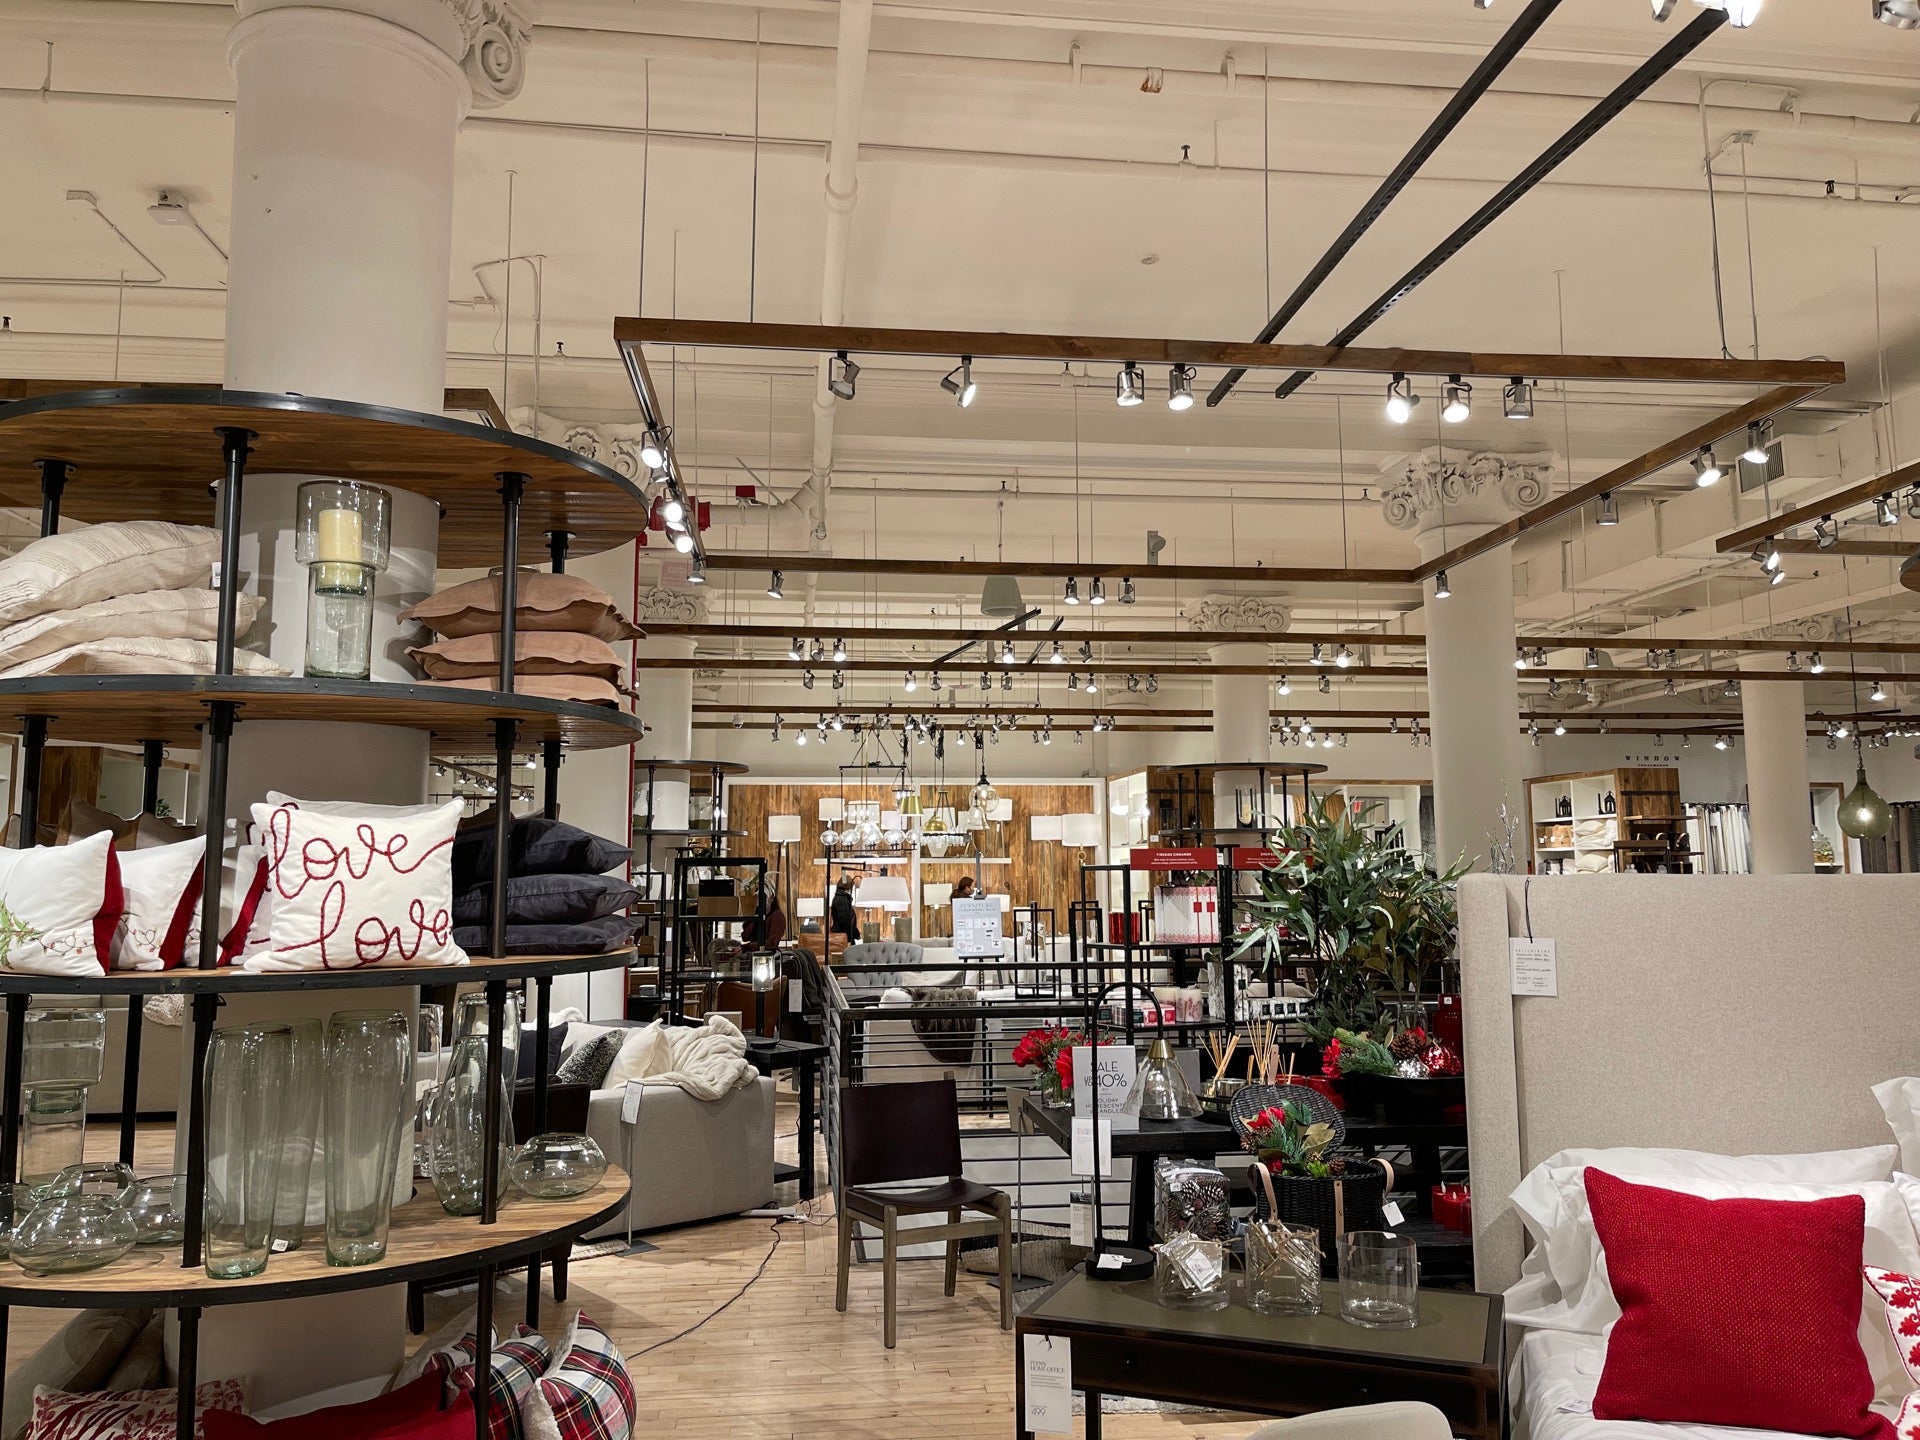 Pottery Barn, 12 W 20th St, New York, NY, Furniture stores - MapQuest